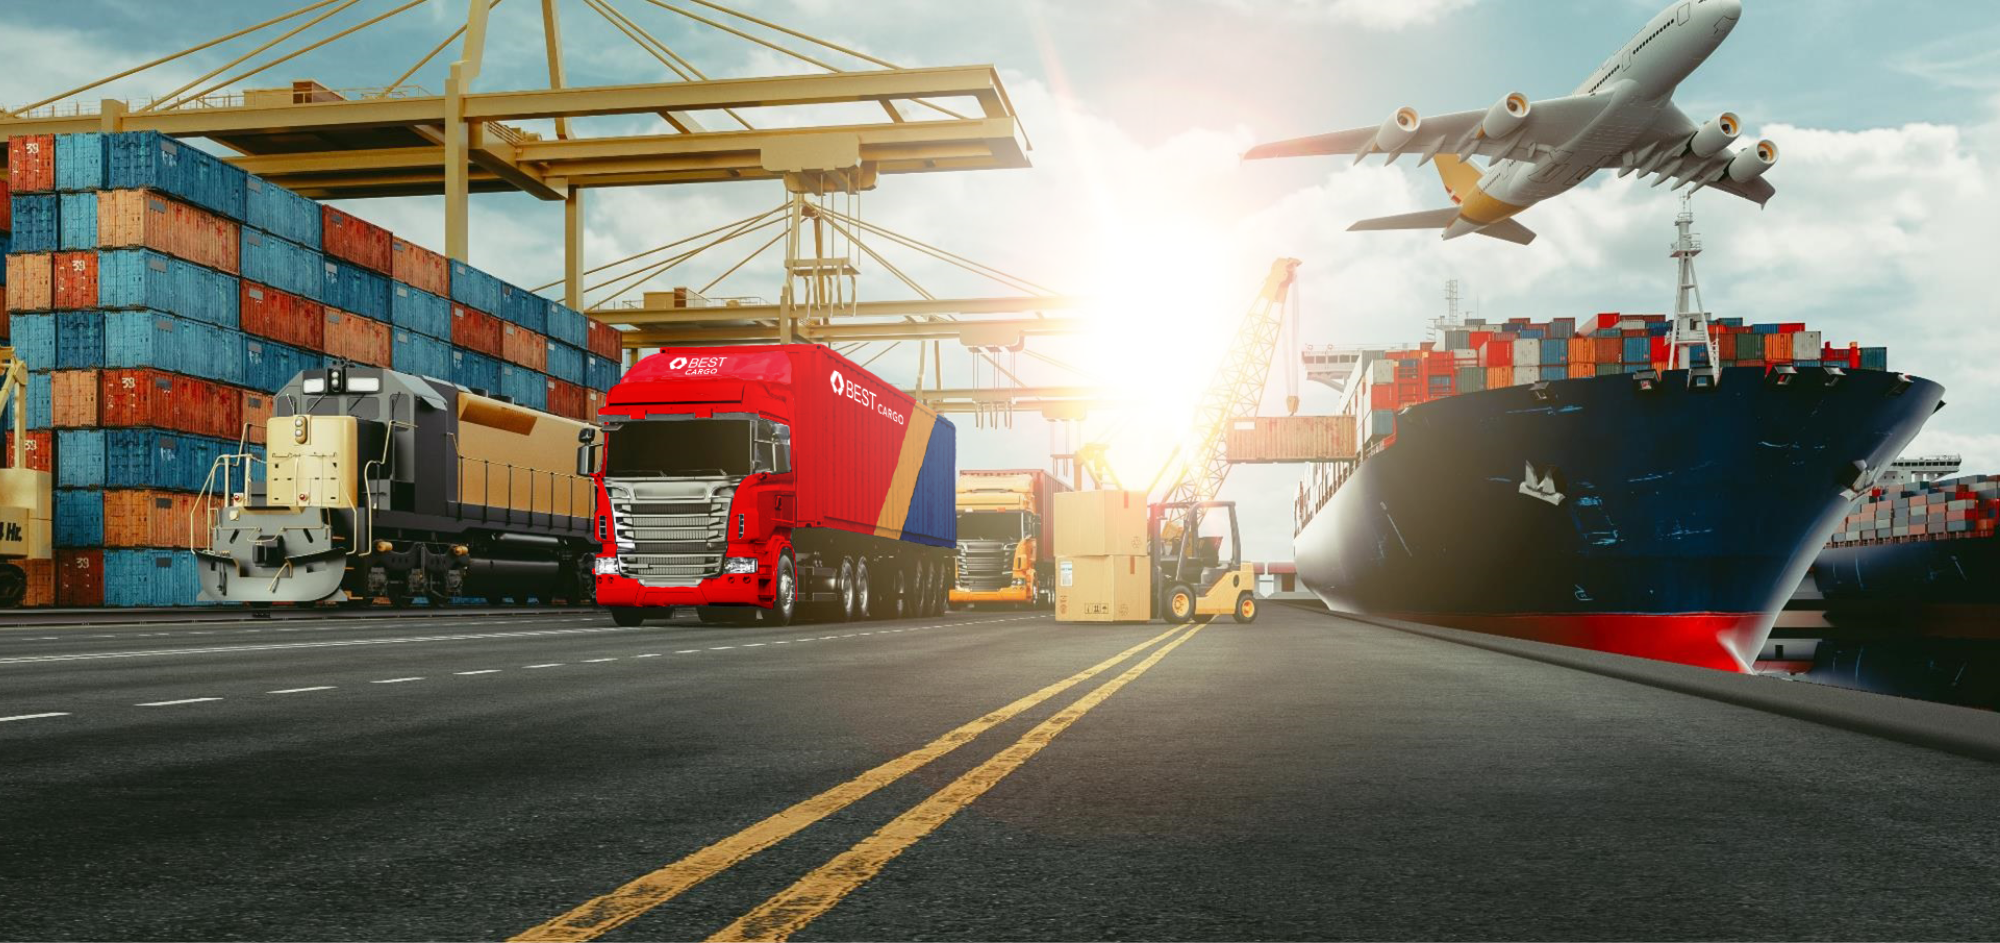 Within Malaysia, BEST Cargo has become a crucial partner in the logistics sector, providing comprehensive logistics solutions for e-commerce, manufacturers, and retailers